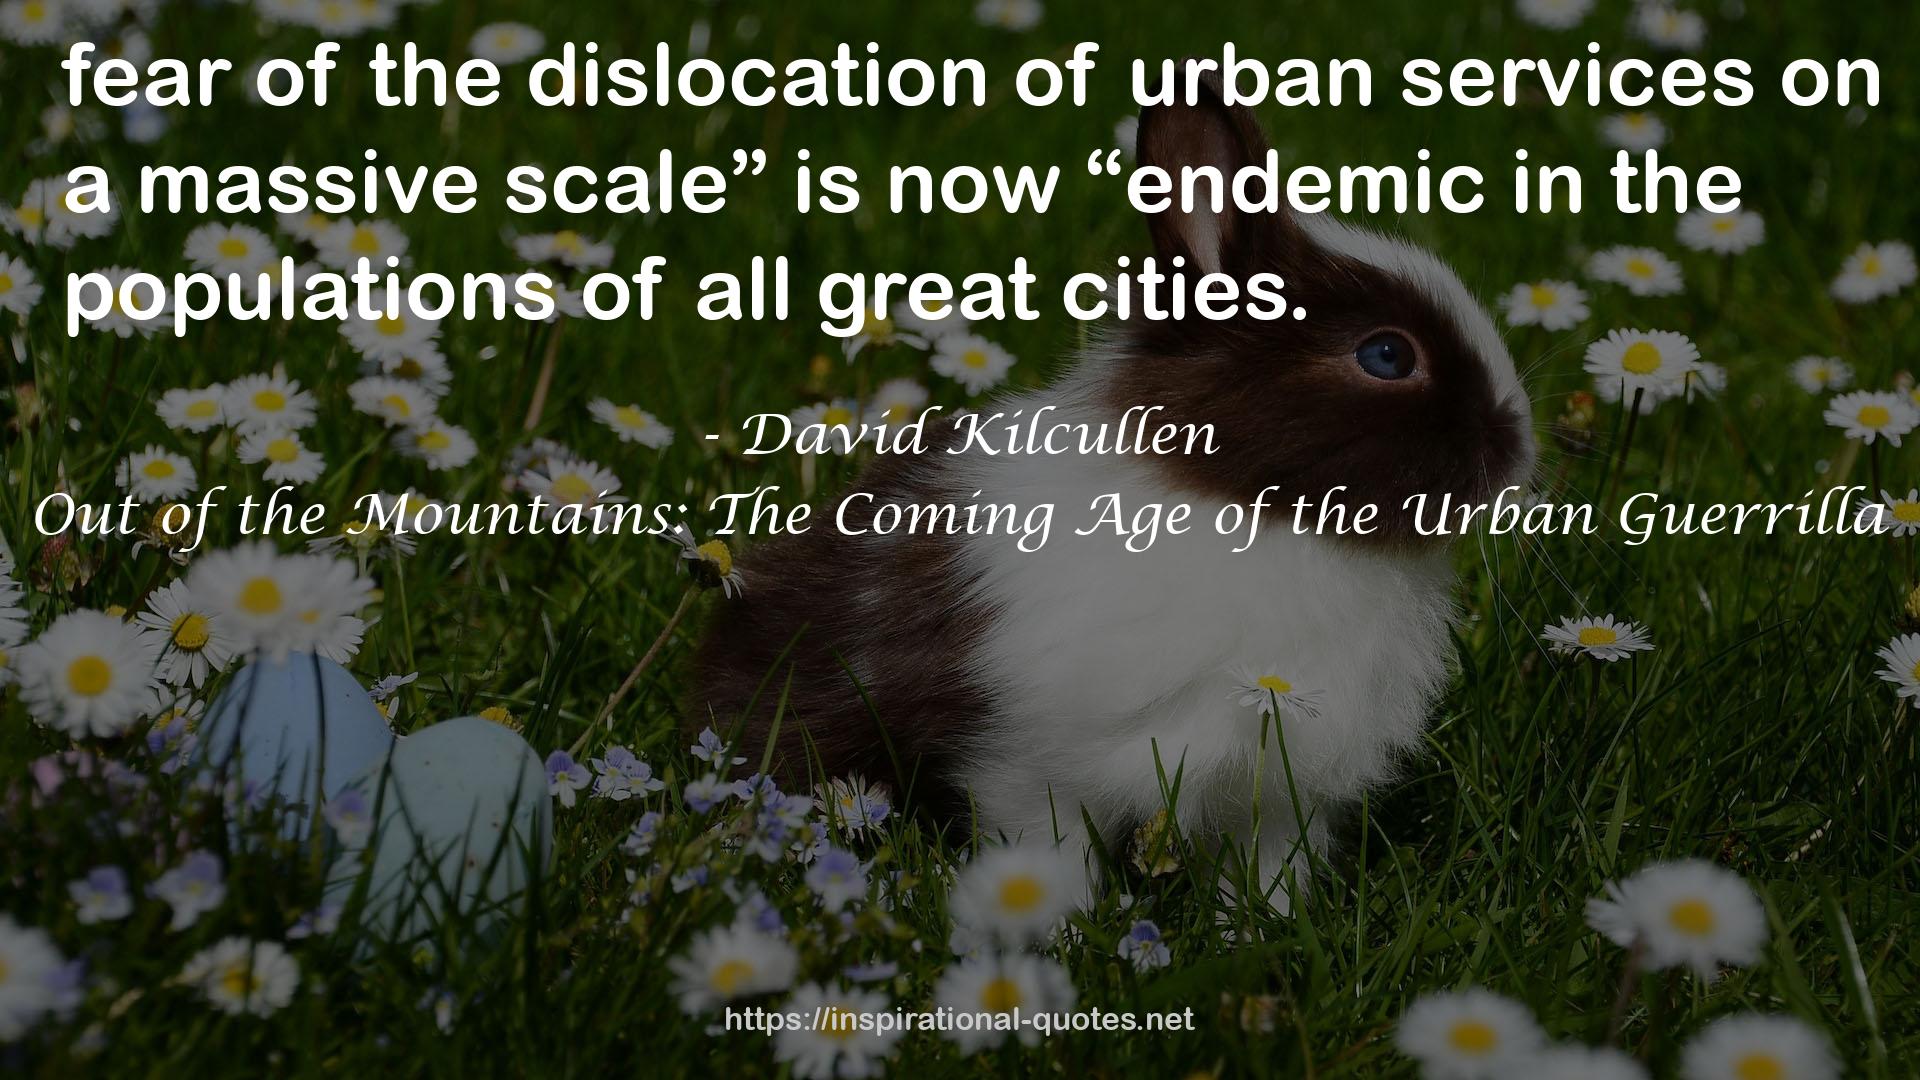 Out of the Mountains: The Coming Age of the Urban Guerrilla QUOTES